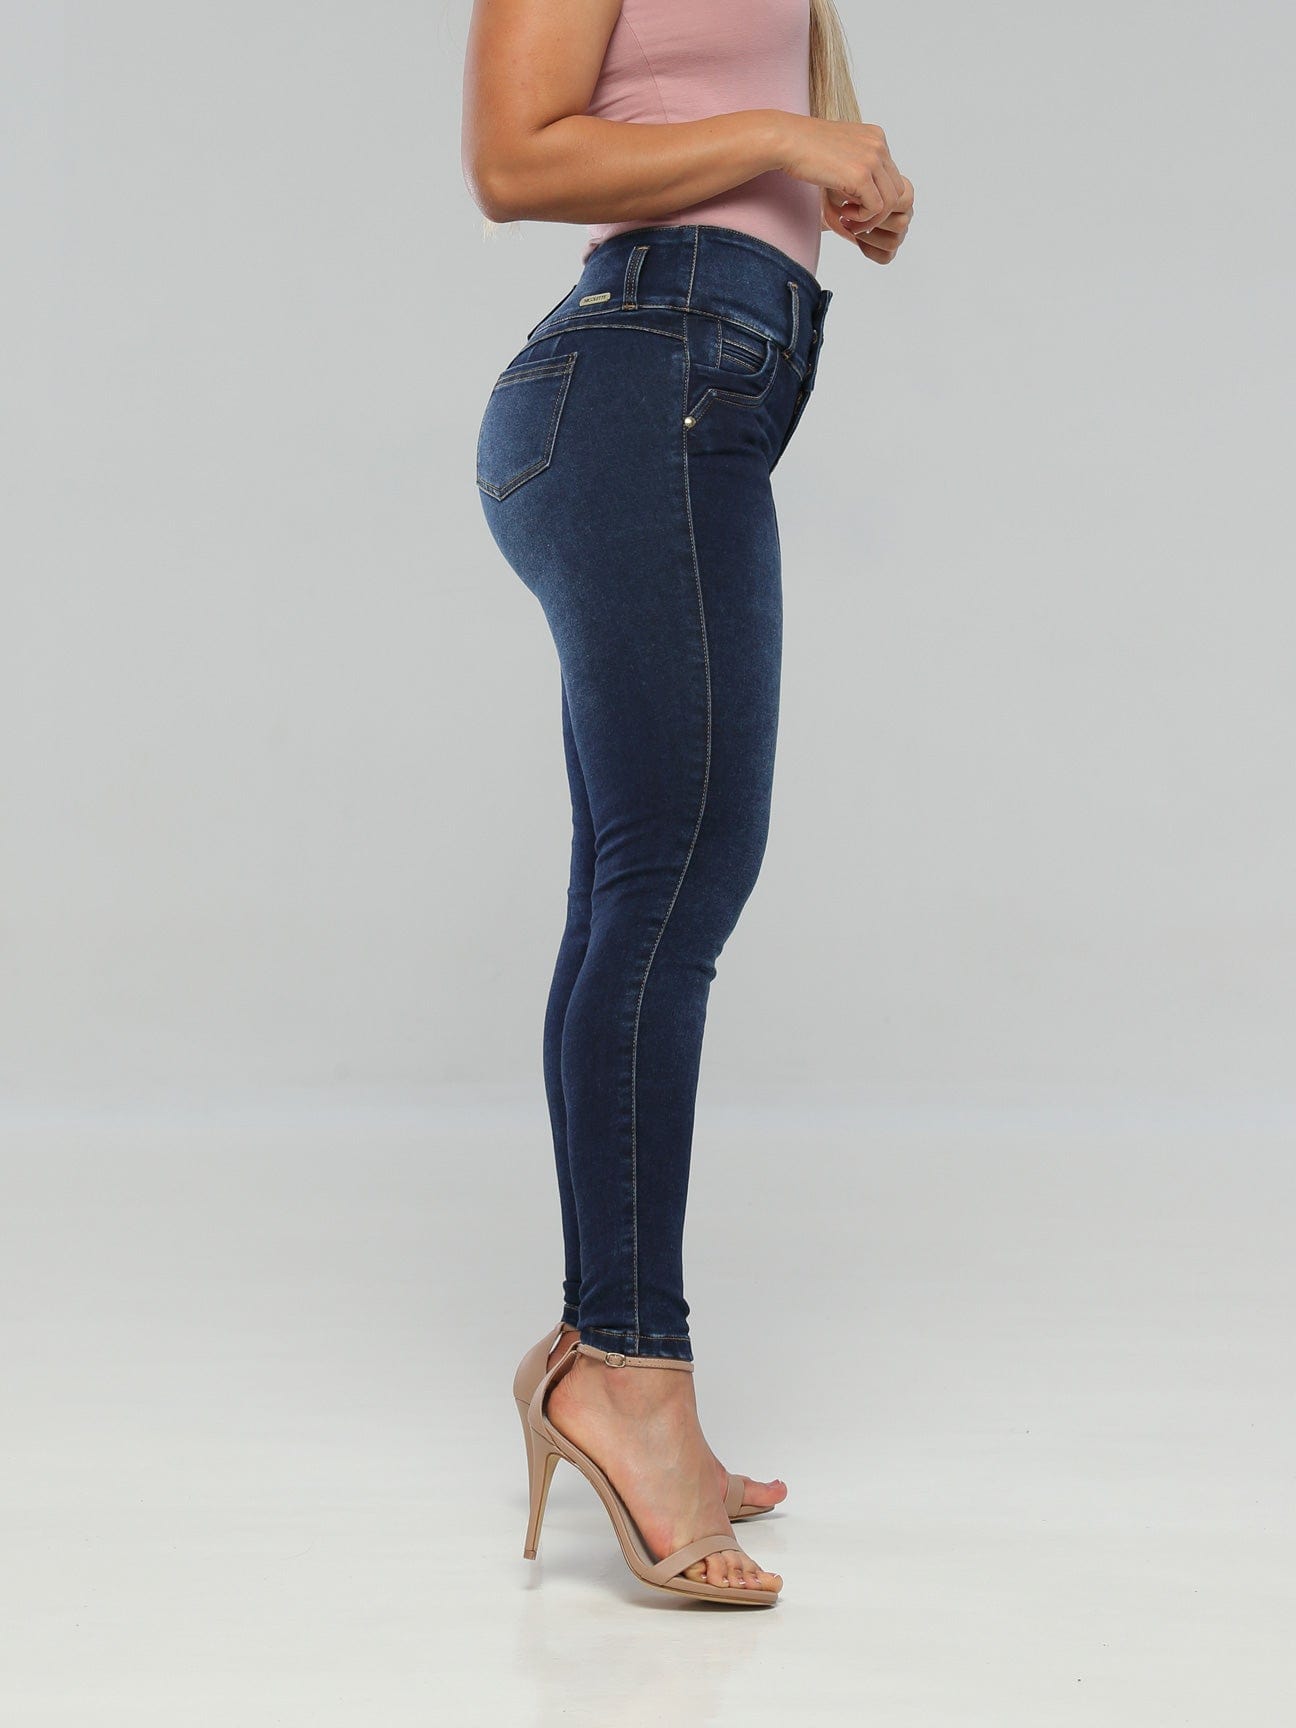 Colombian 217988 Jeans Bum and Hip Enhancing Pants Butt Lifter